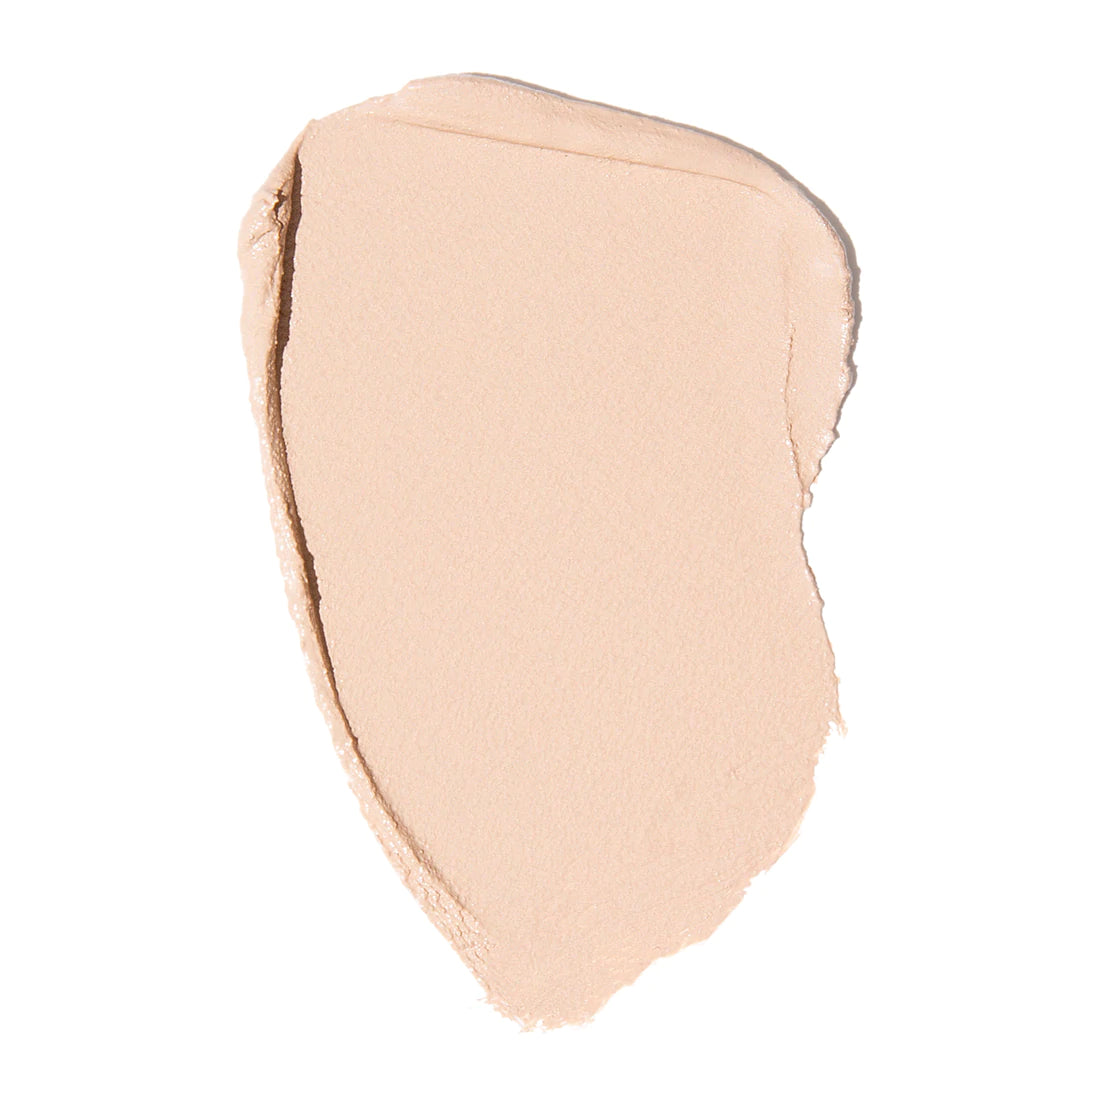 Sample of Cache Cream RAW - Foundation & Concealer by Carlucce